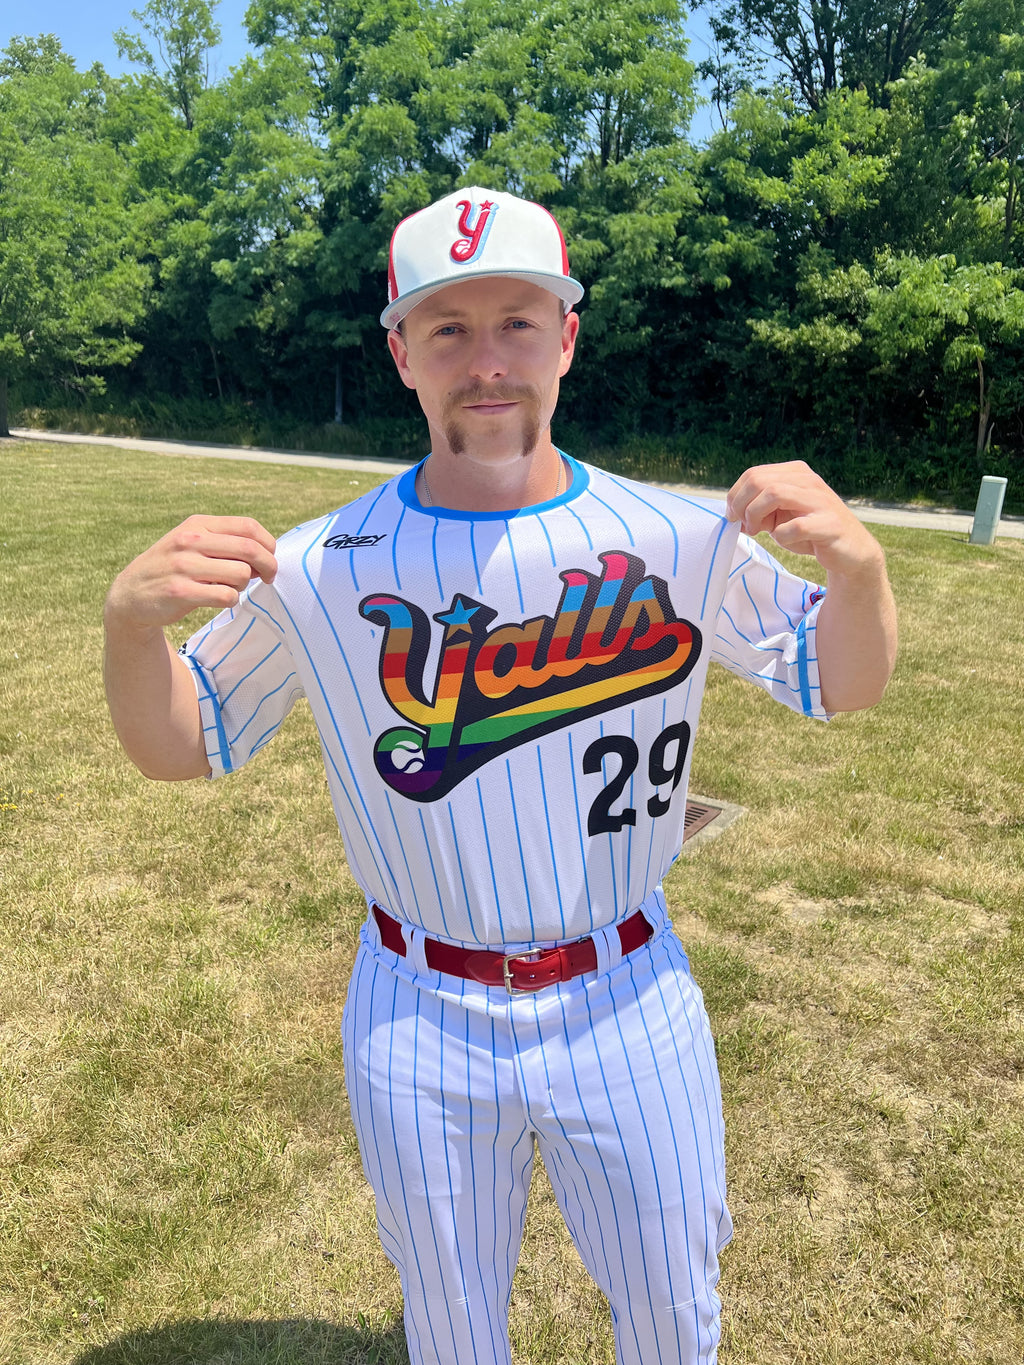 Adult Official Y'alls Replica Jersey – Yall's Baseball